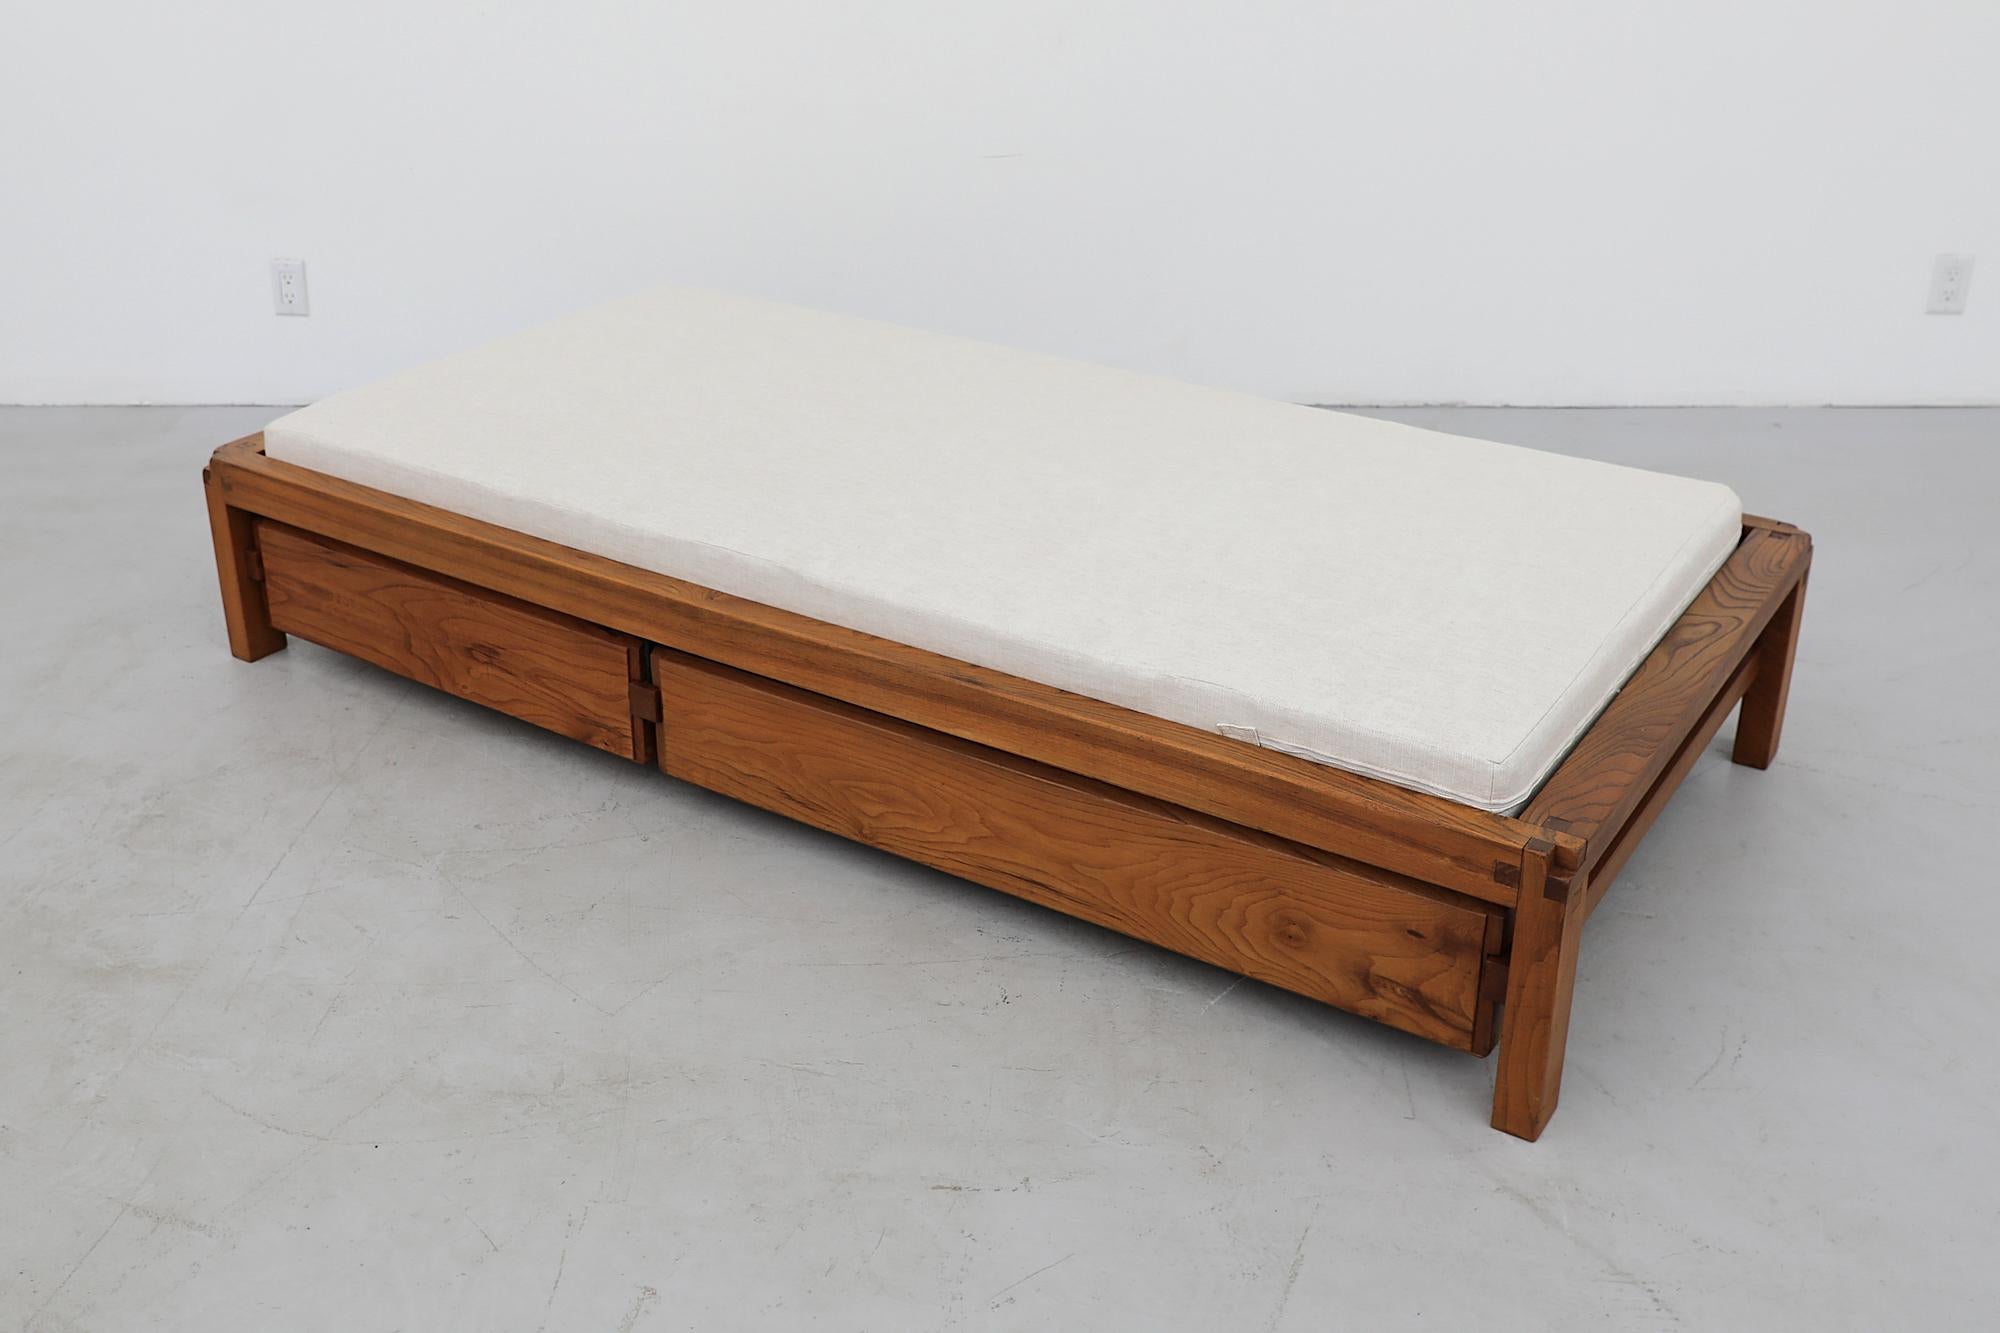 Pierre Chapo 'L03' Daybed in Elm with Storage & Newly Made Mattress, 1960s For Sale 4